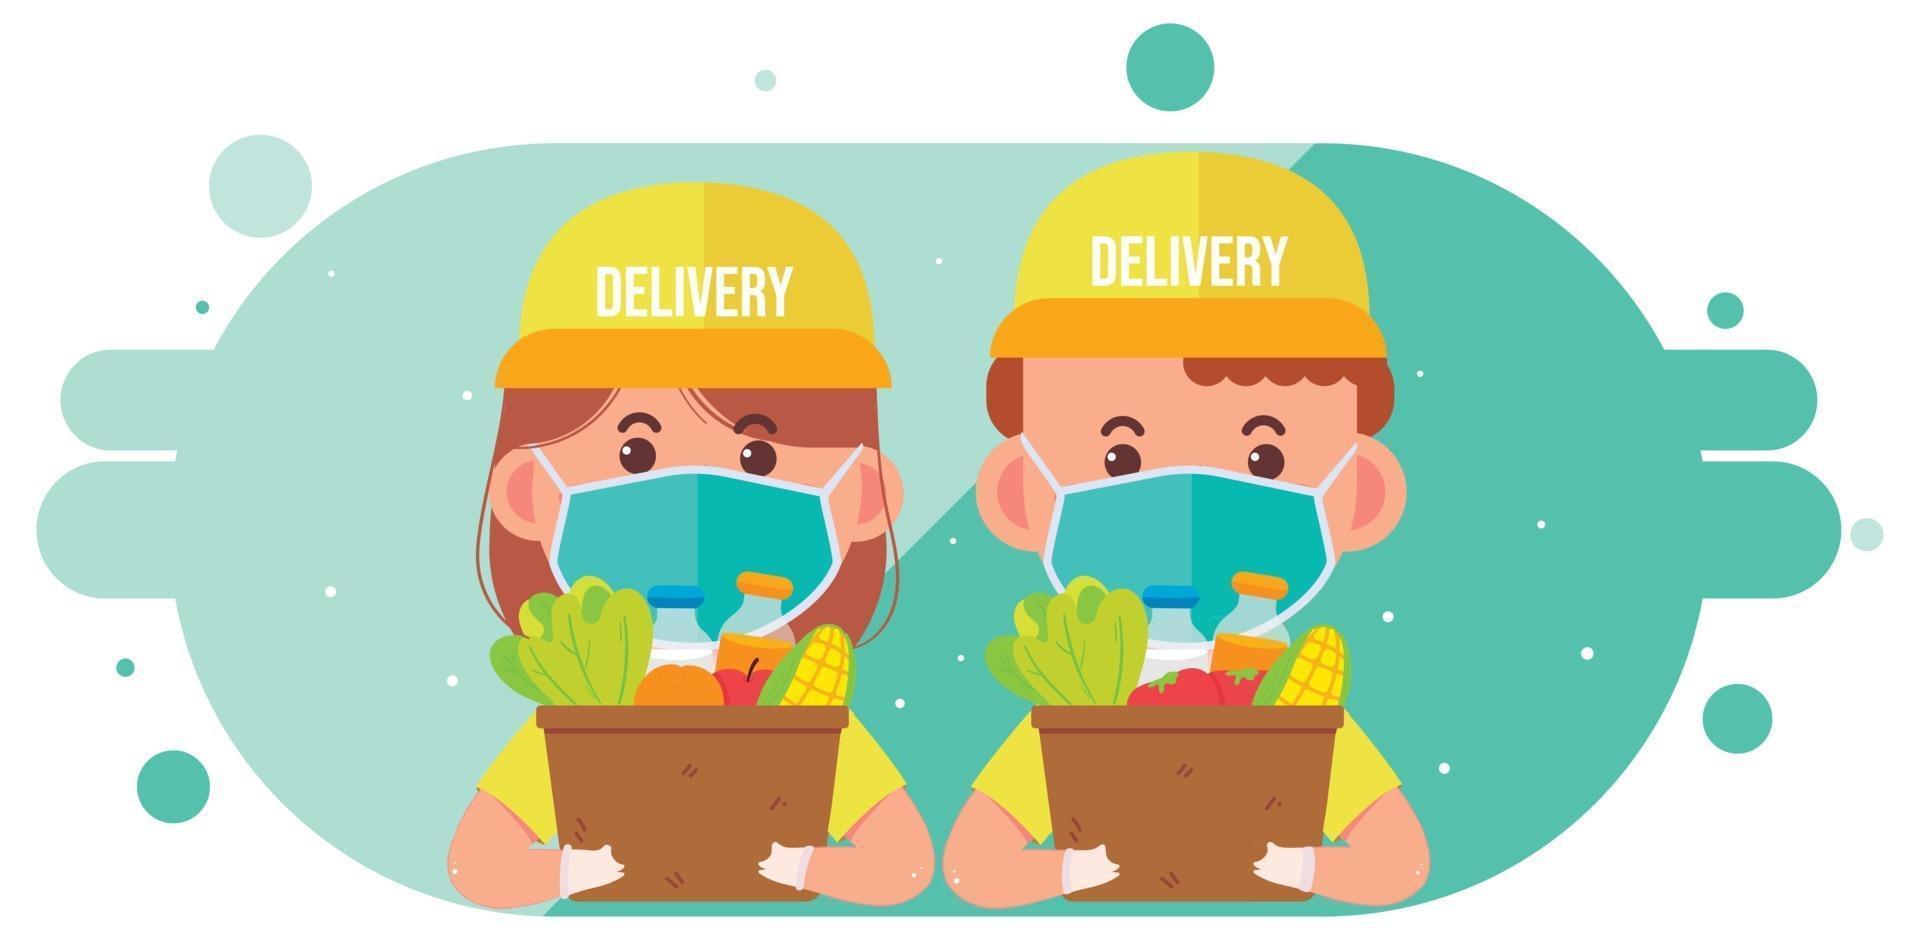 Delivery woman and delivery man carrying package box of grocery food and drink from store cartoon art illustration vector